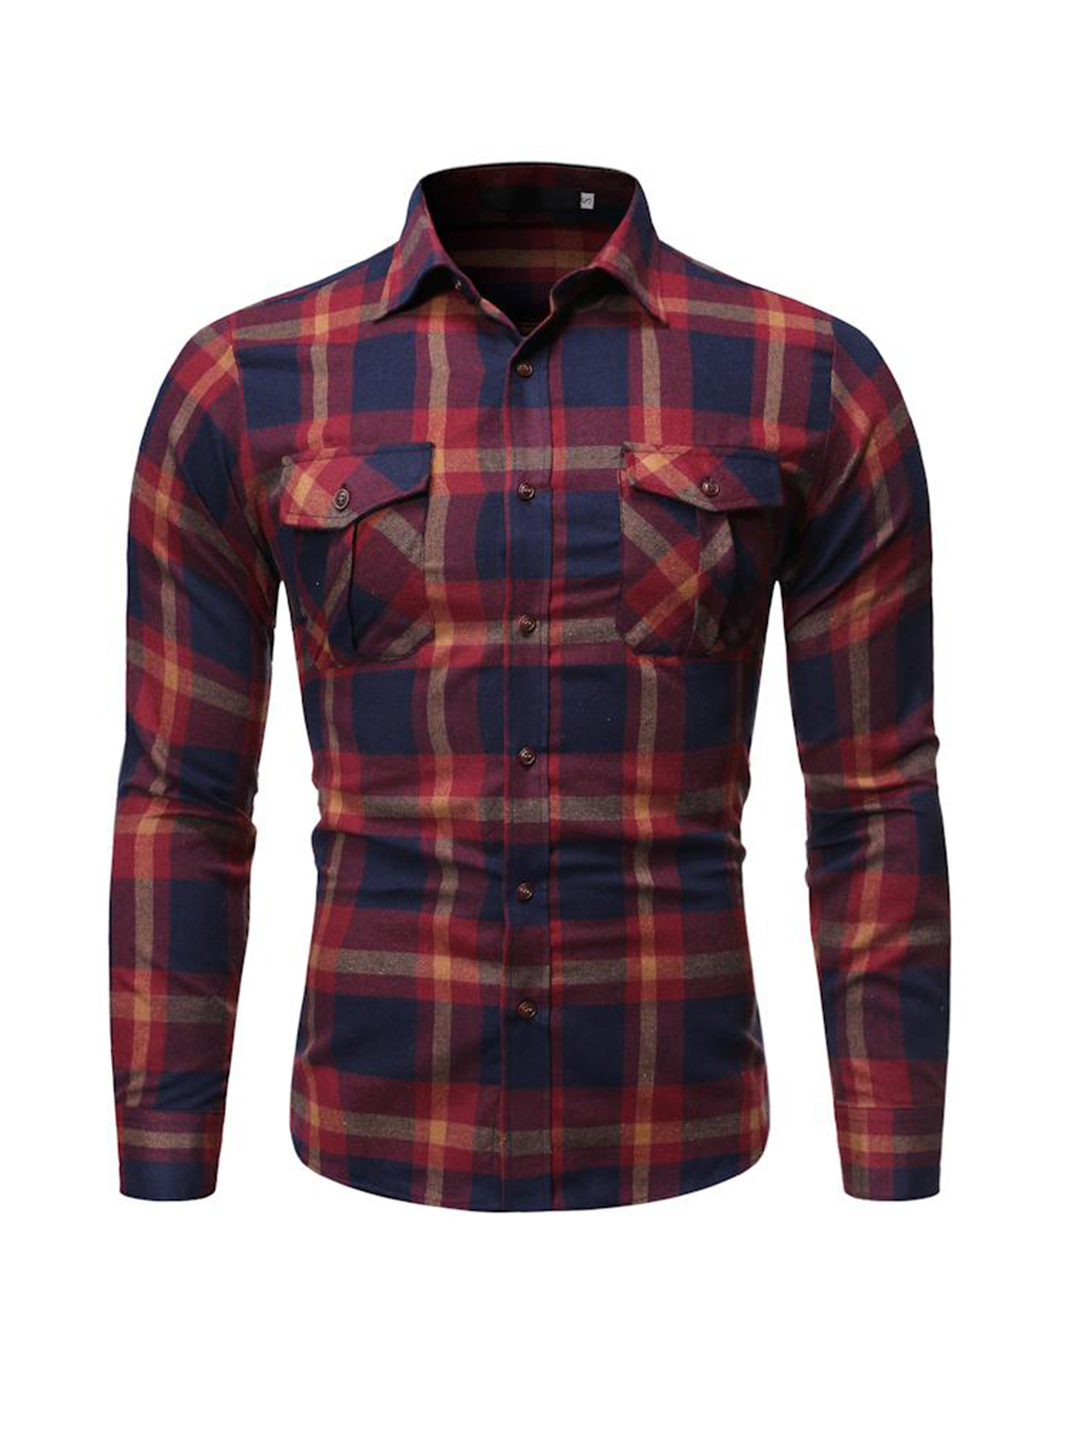 Men's Andres Double Pocket Check Shirt-poisonstreetwear.com